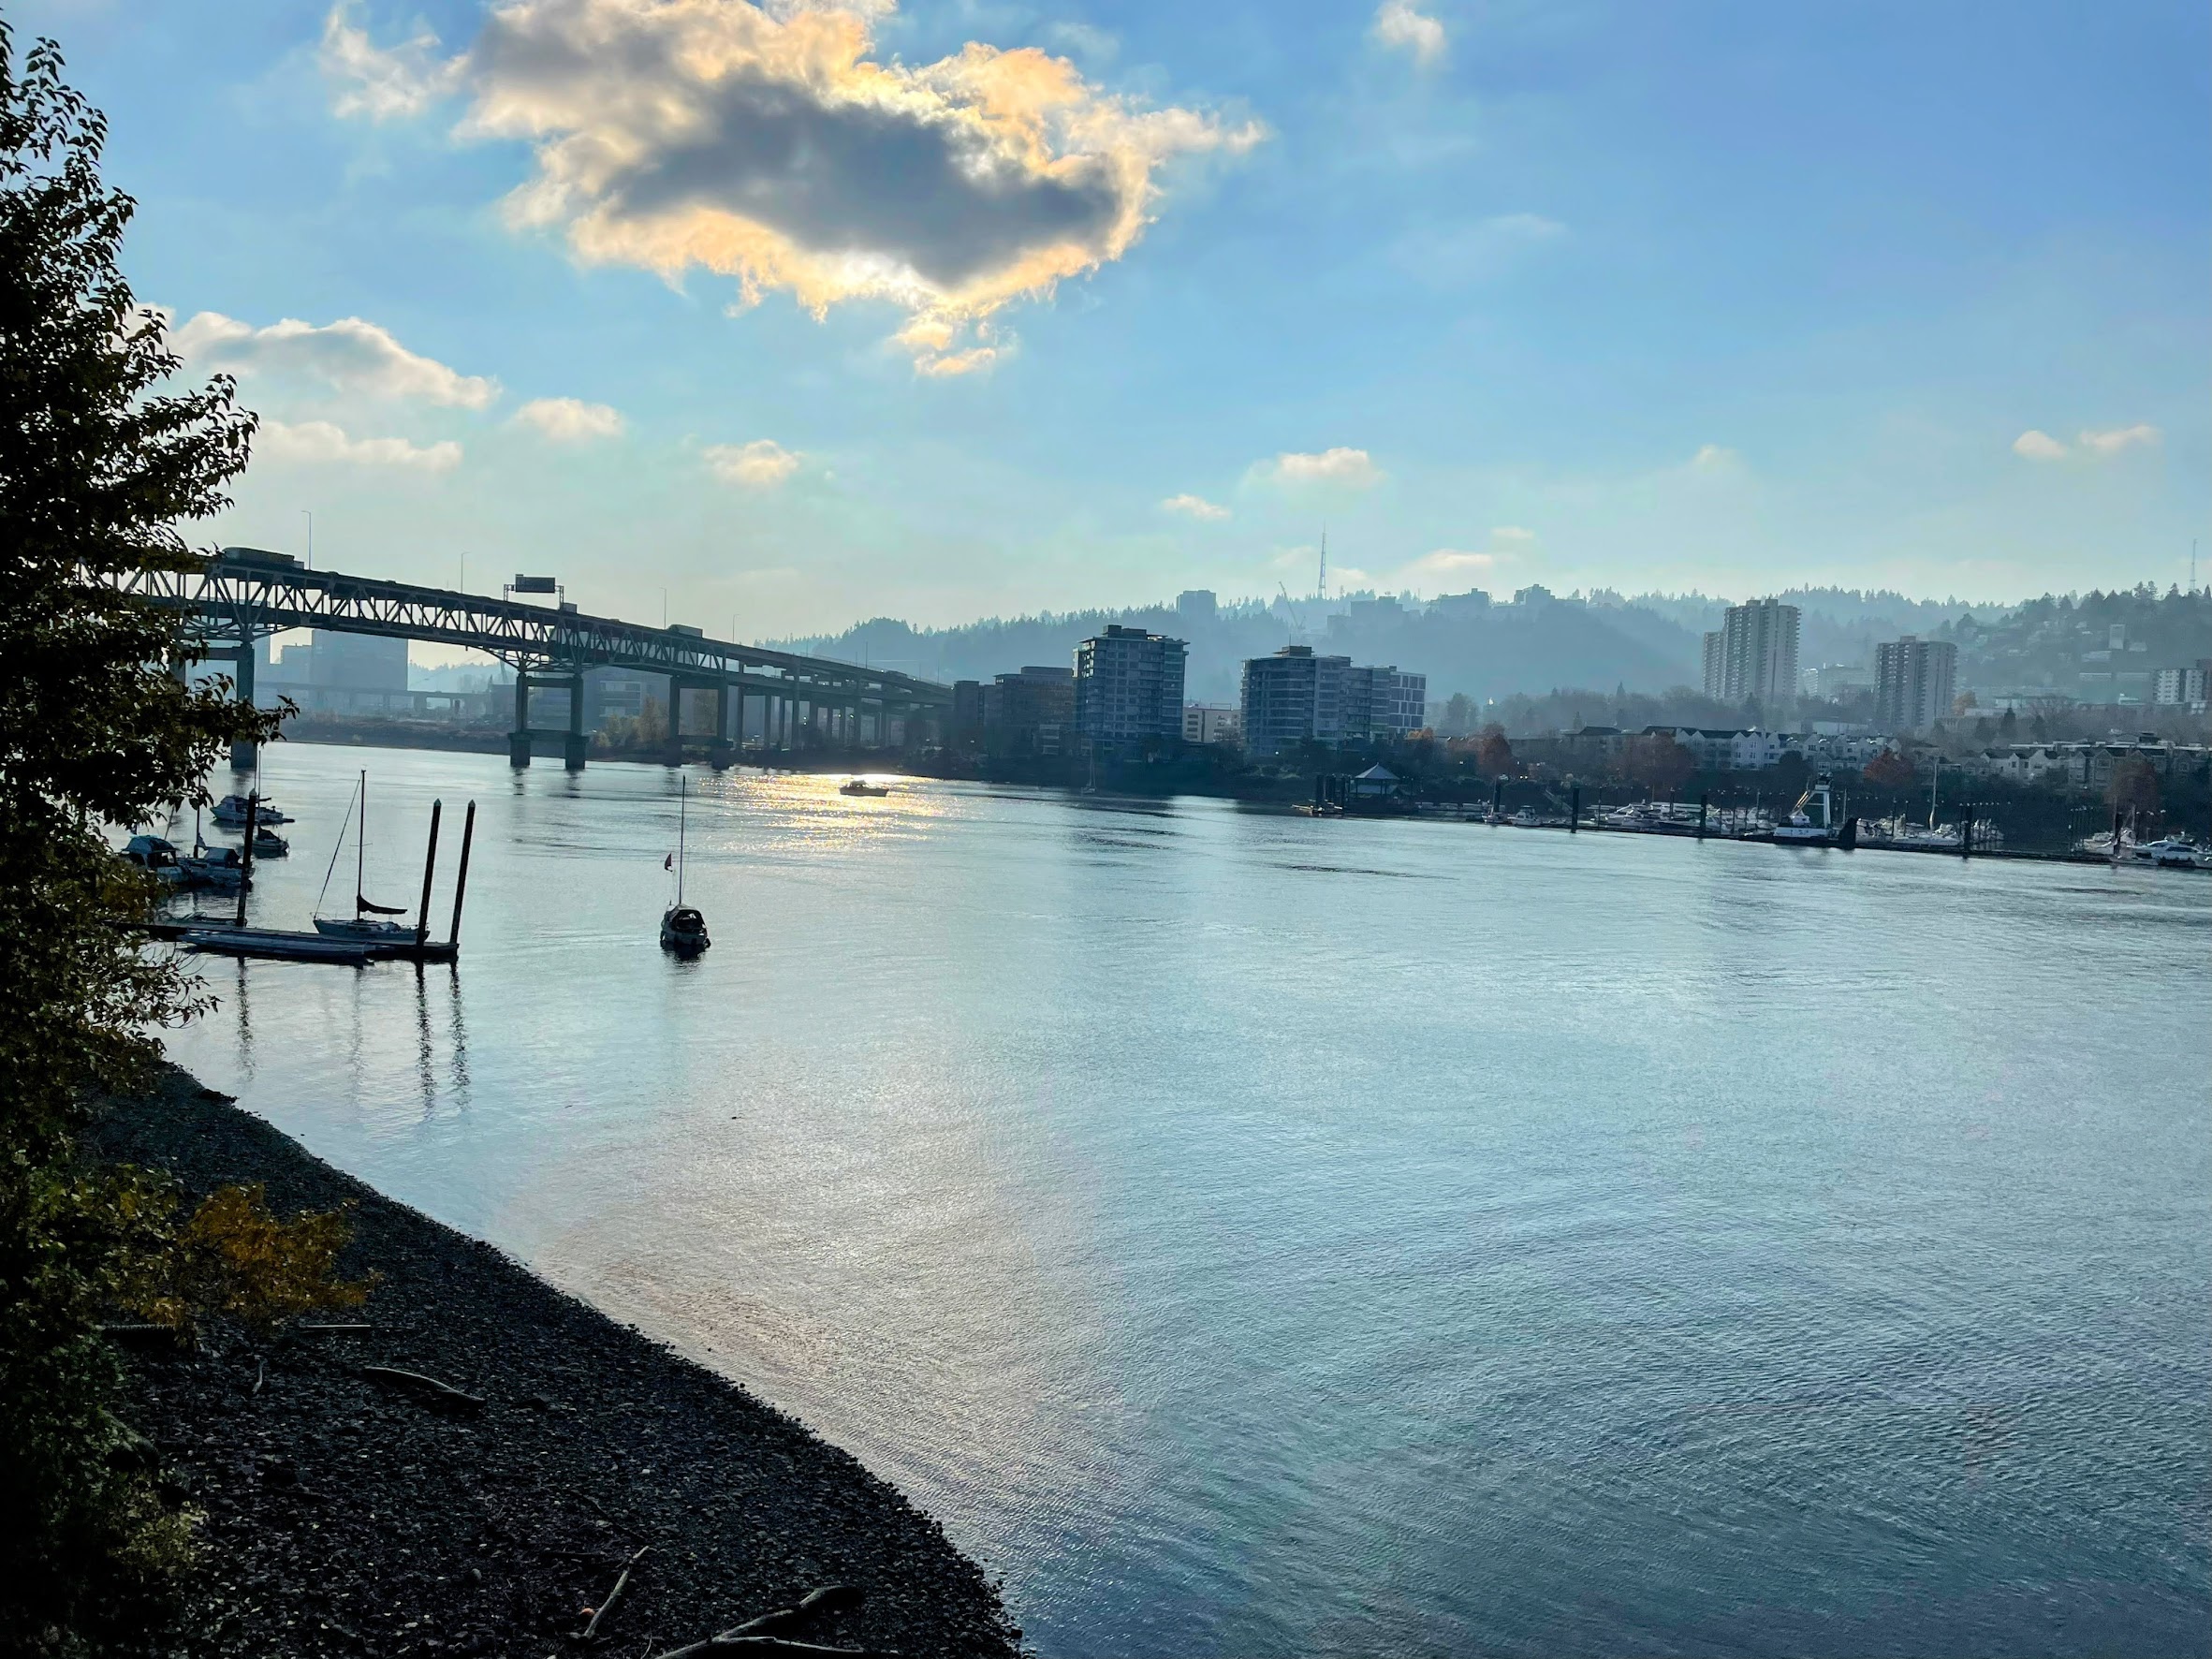 Photo looking west across the Willamette River at downtown Portland, Oregon